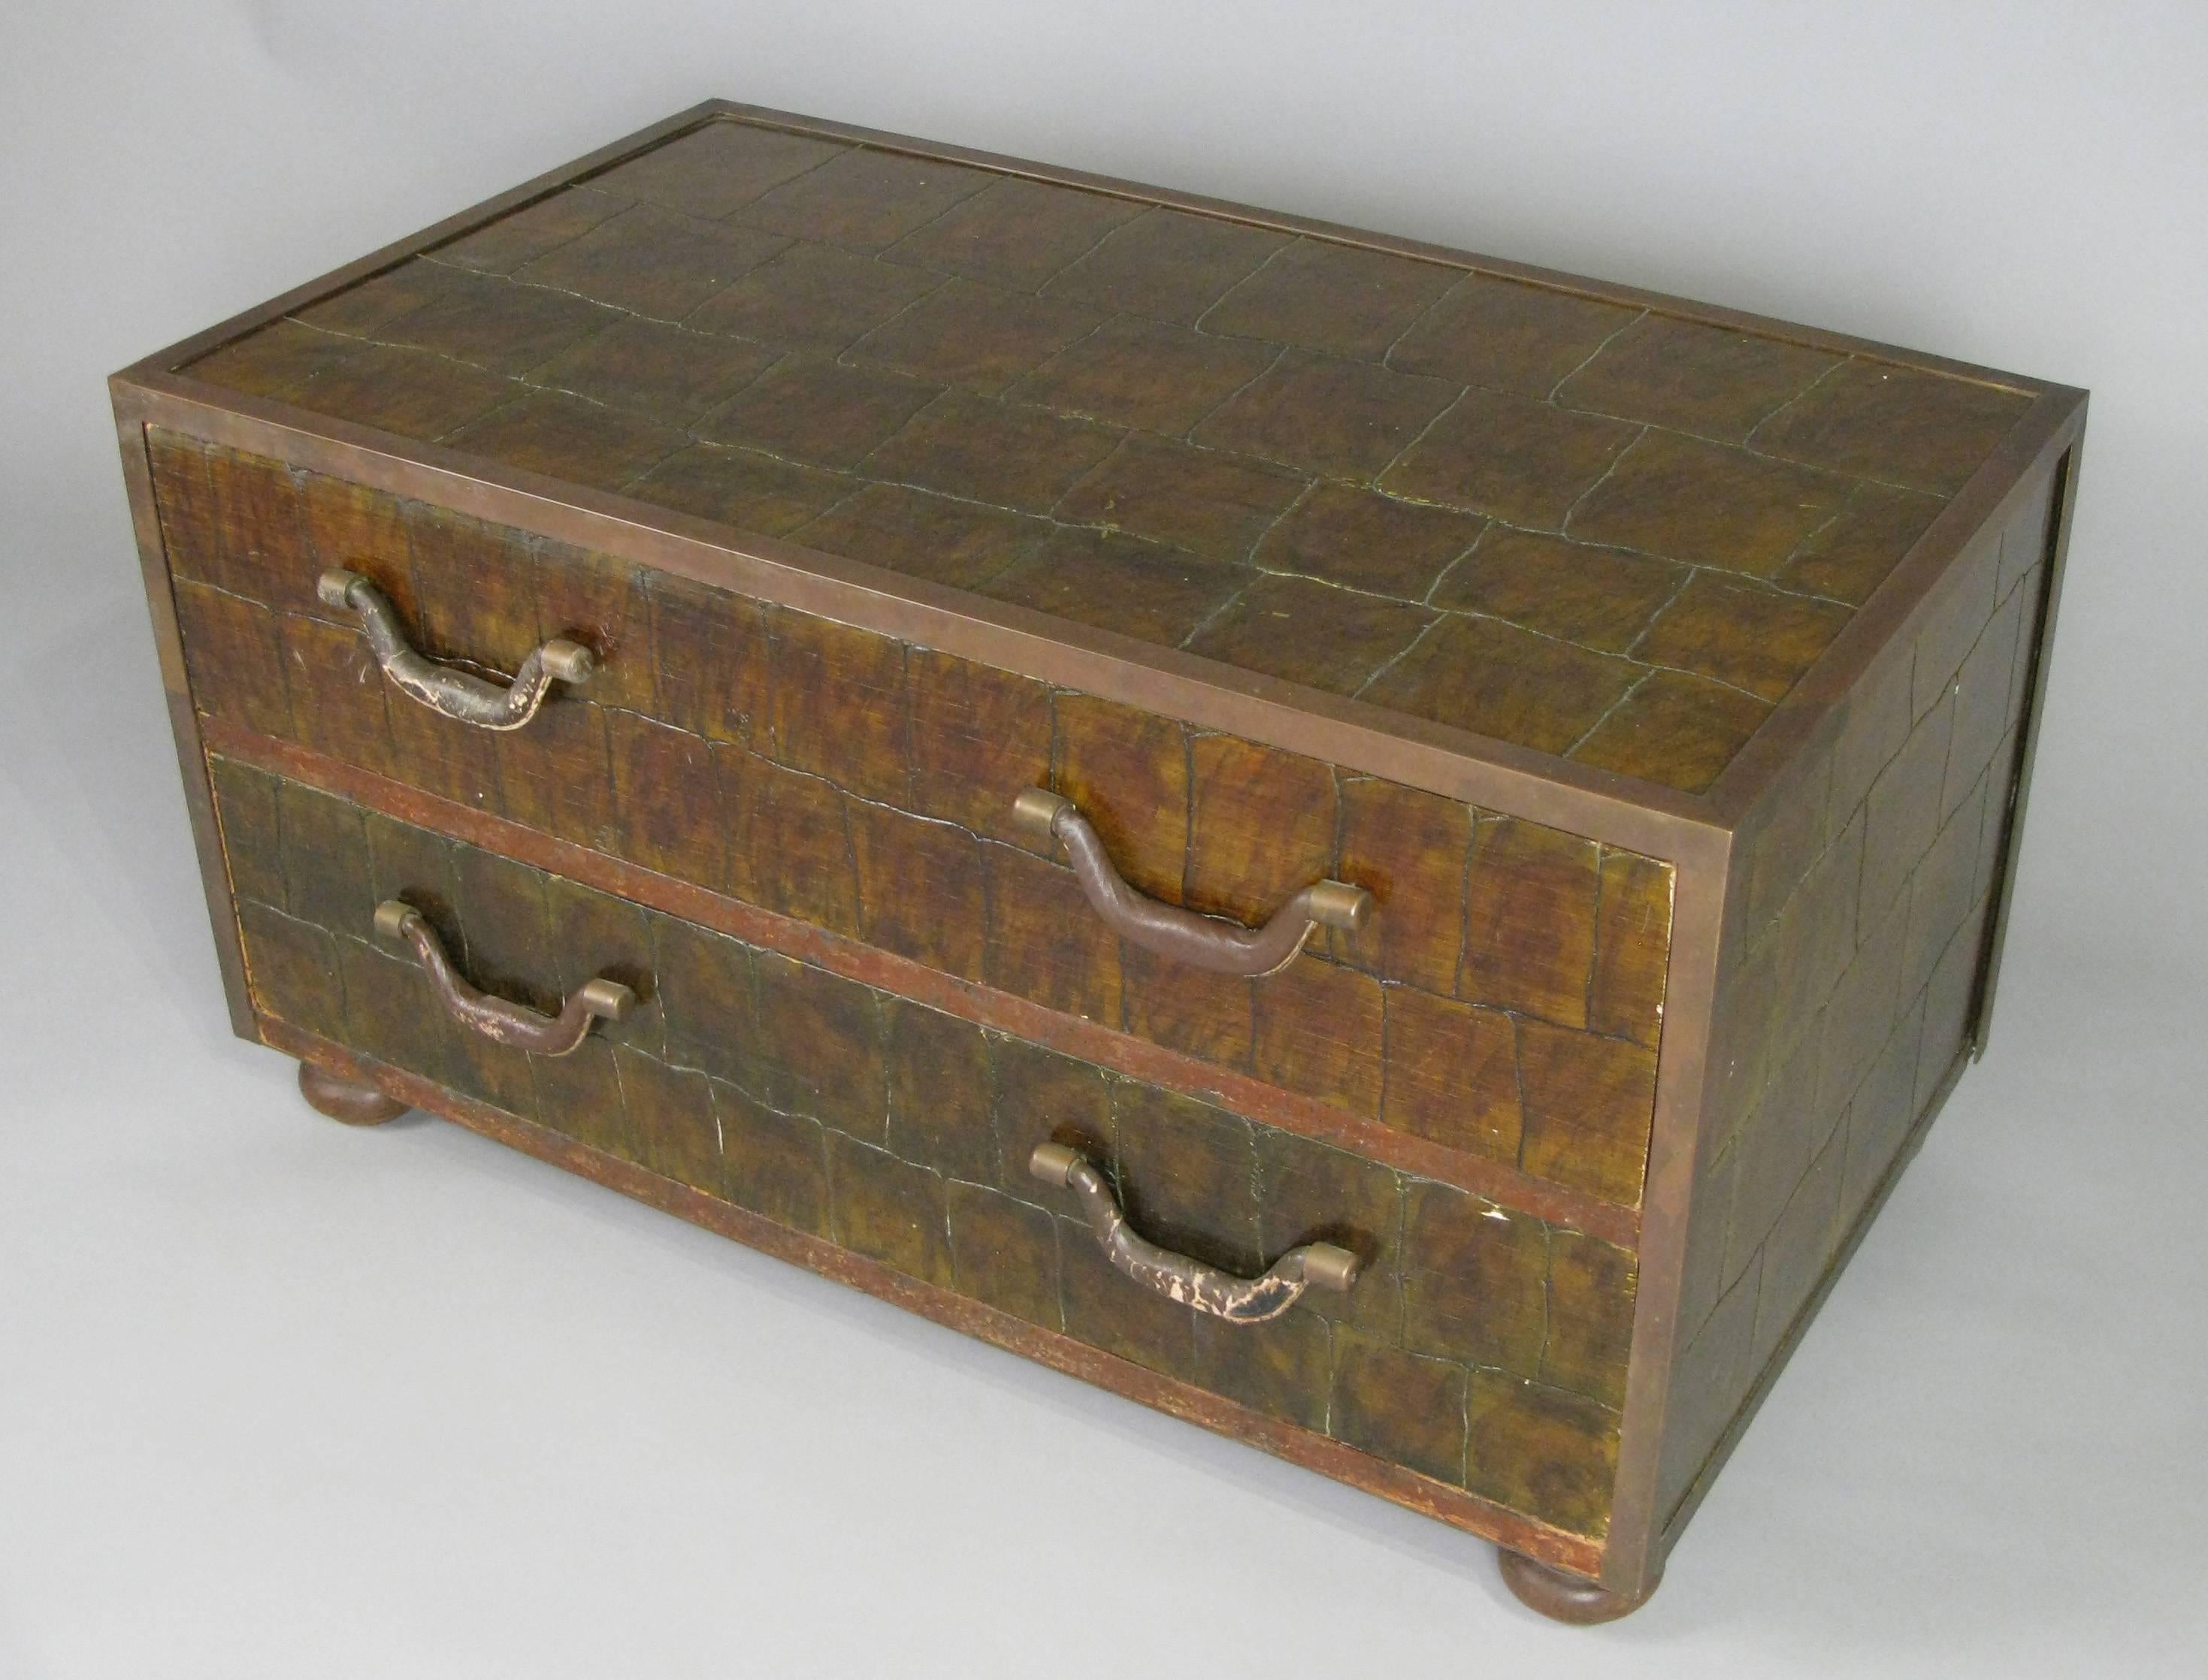 A vintage 1960s two-drawer chest made in Spain by Sarreid, with a crocodile pattern and leather wrapped handles.